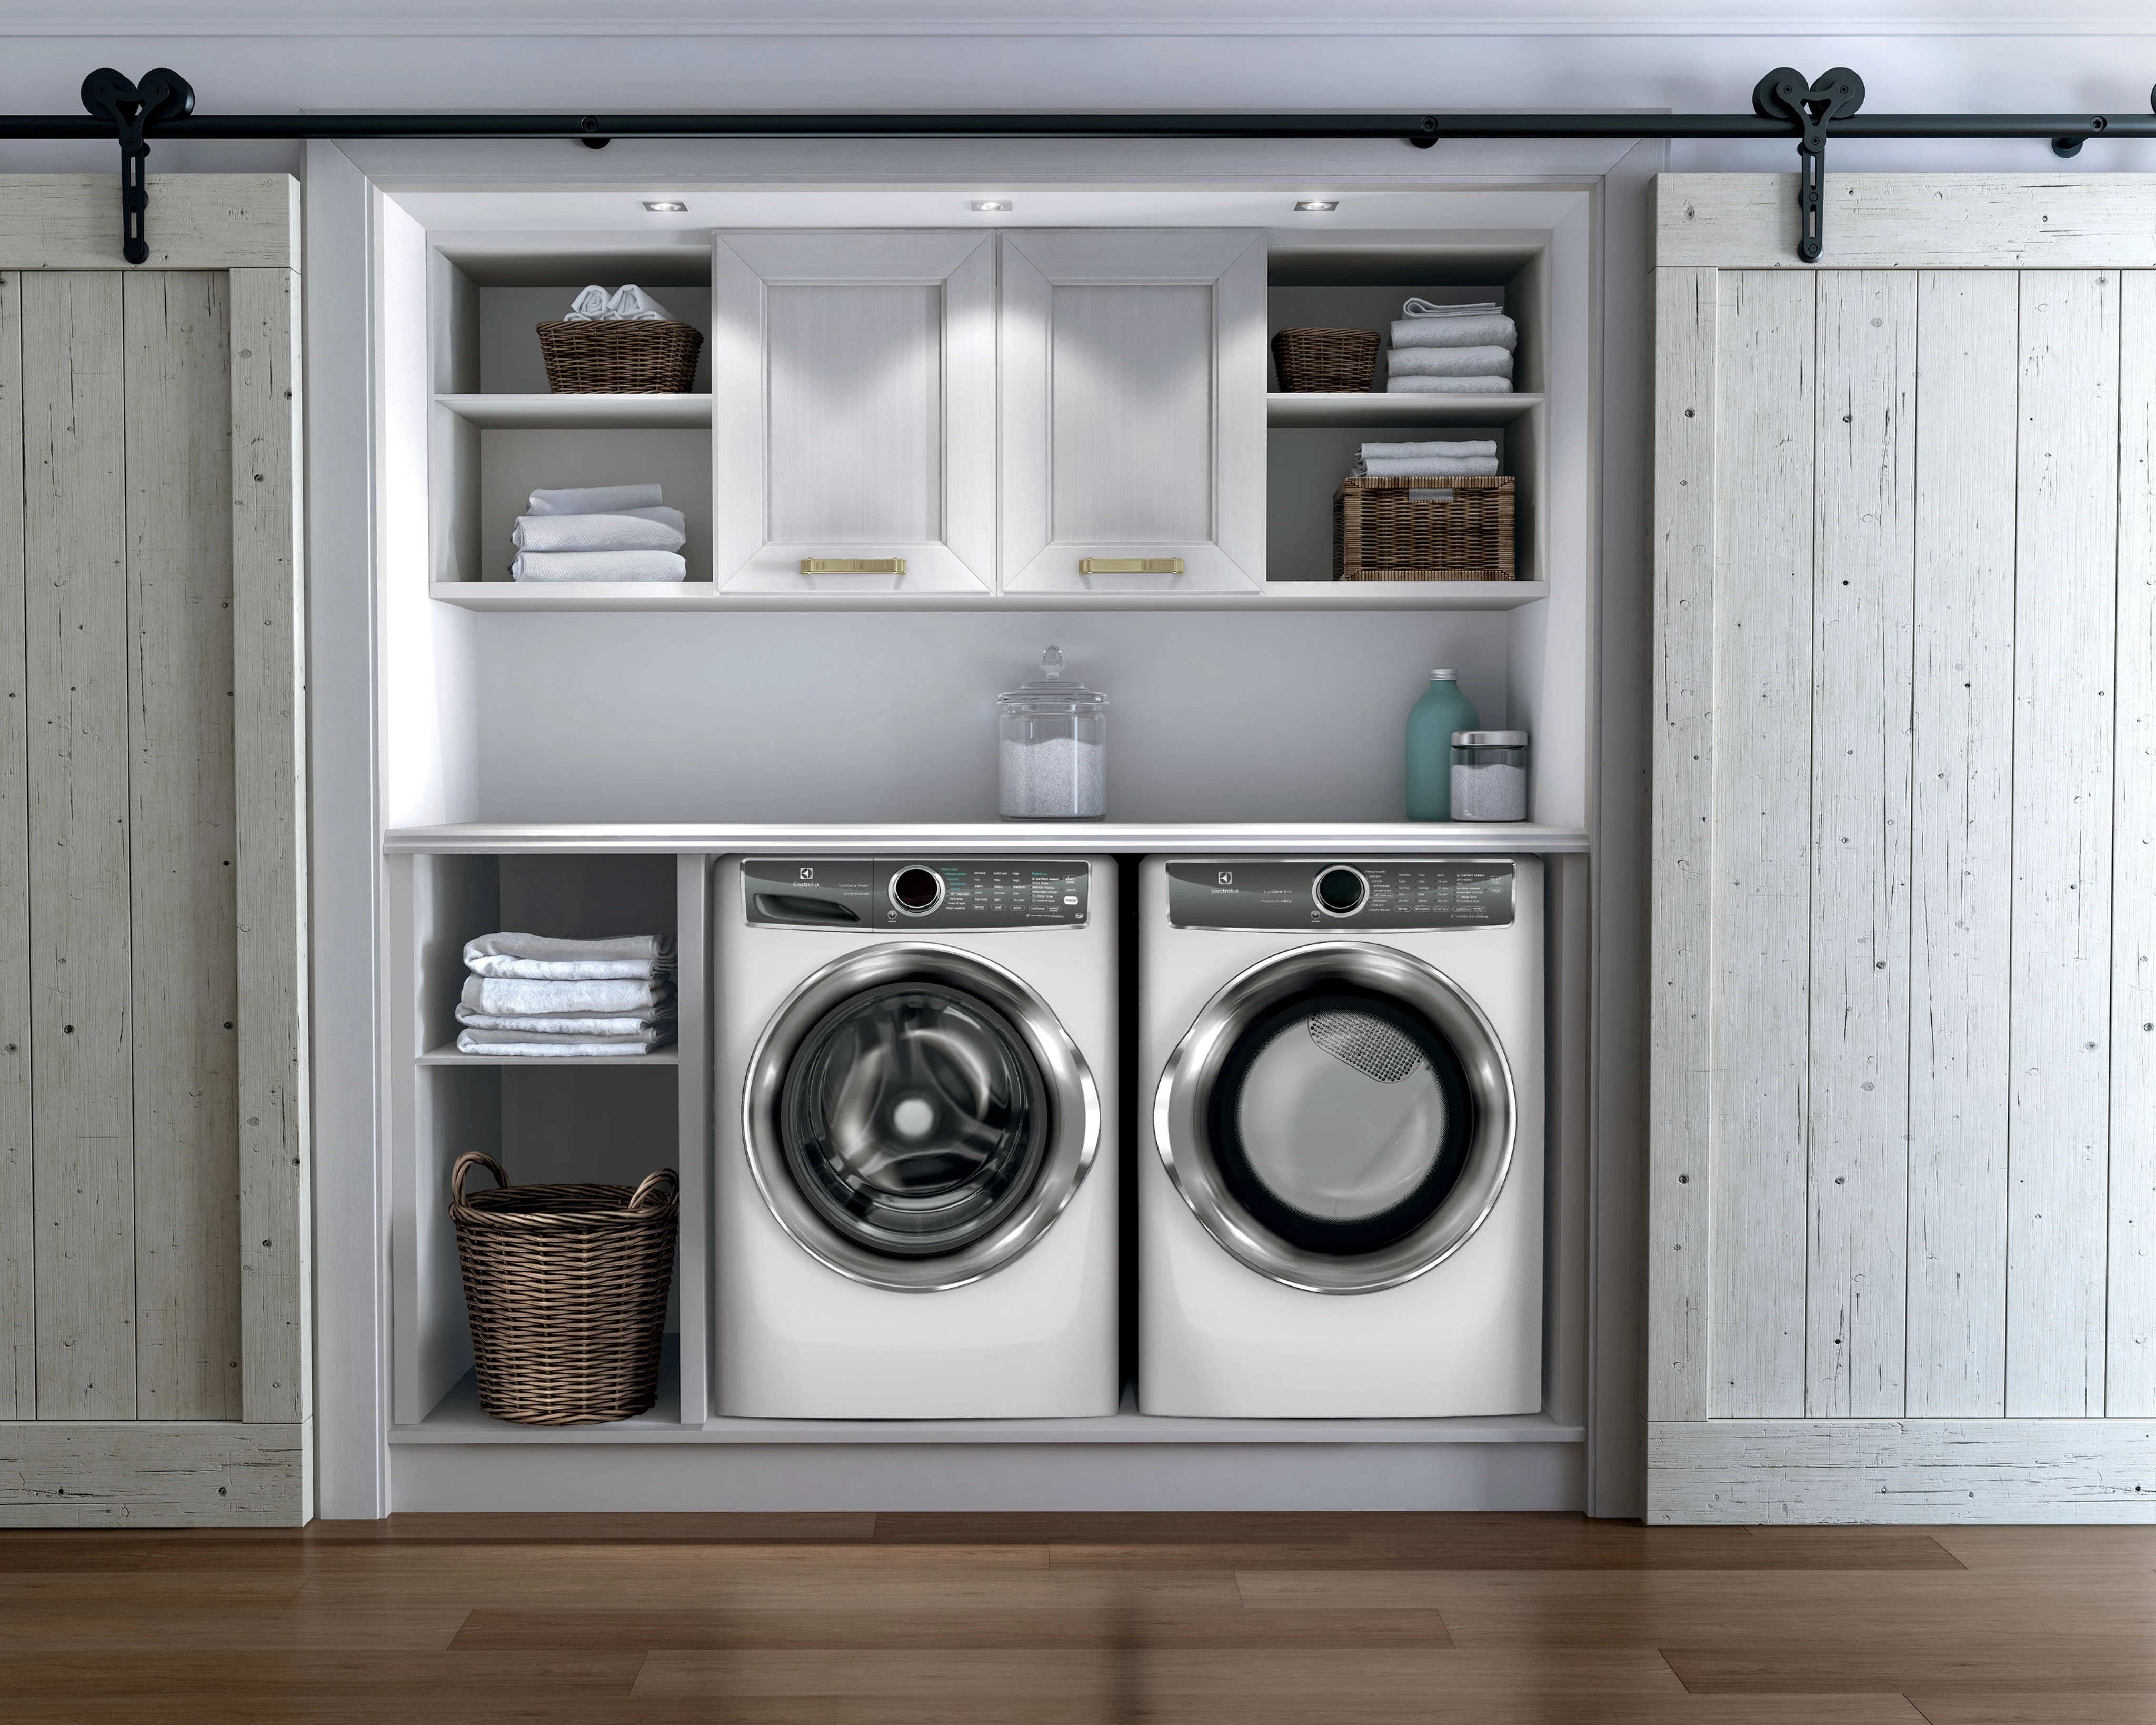 Electrolux white front load laundry pair in a well-organized laundry room